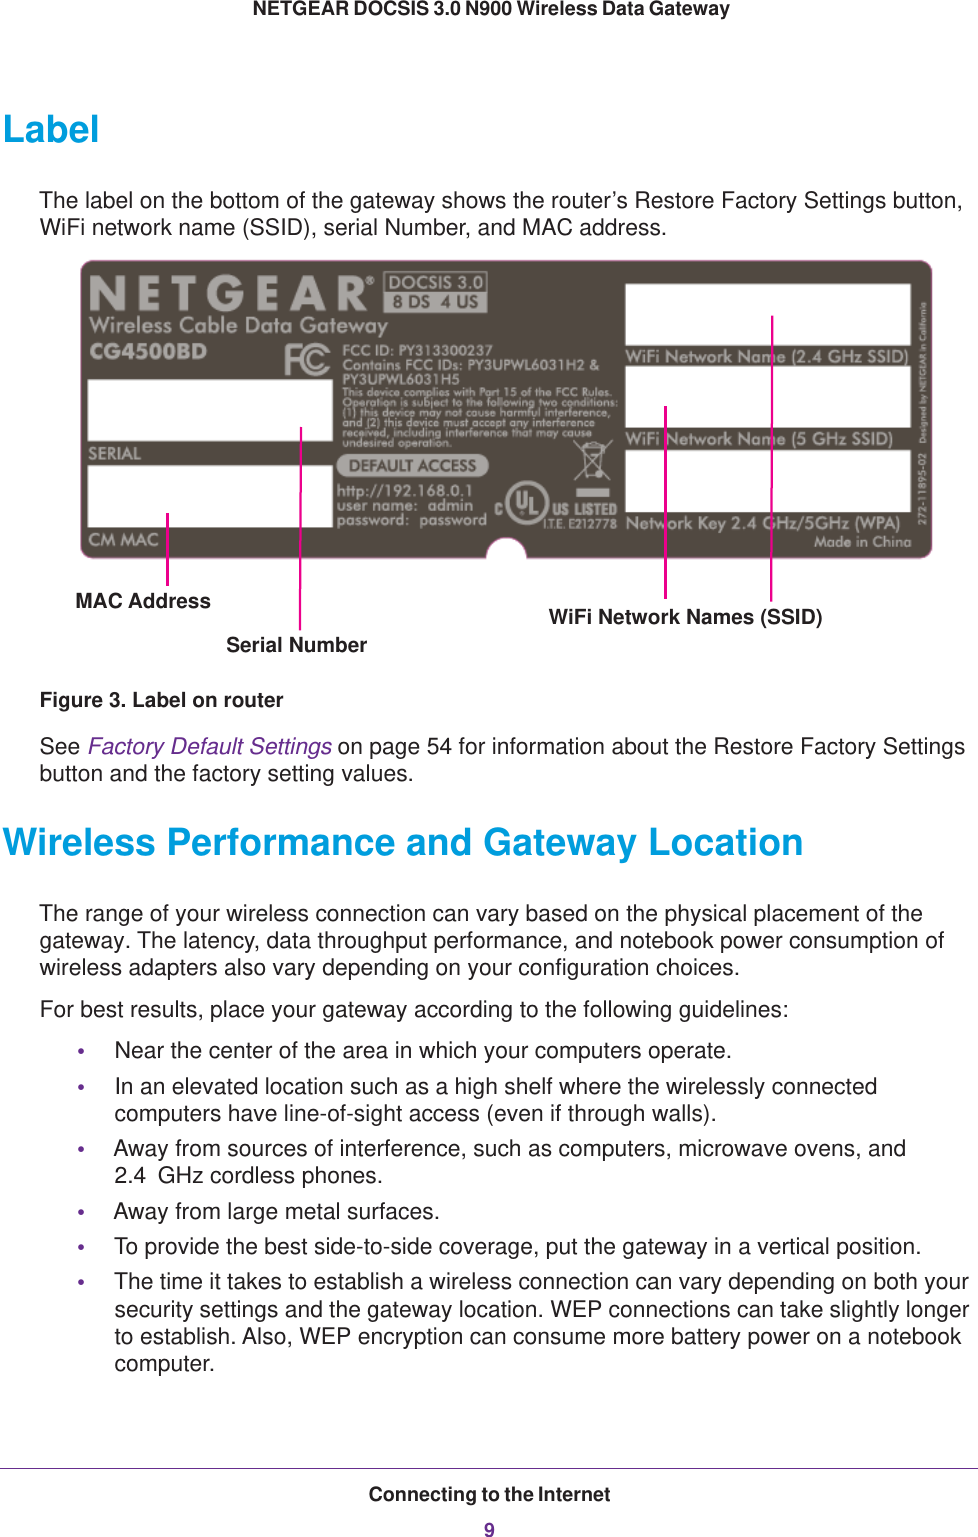 Connecting to the Internet9 NETGEAR DOCSIS 3.0 N900 Wireless Data GatewayLabelThe label on the bottom of the gateway shows the router’s Restore Factory Settings button, WiFi network name (SSID), serial Number, and MAC address. MAC Address WiFi Network Names (SSID)Serial NumberFigure 3. Label on routerSee Factory Default Settings on page  54 for information about the Restore Factory Settings button and the factory setting values. Wireless Performance and Gateway LocationThe range of your wireless connection can vary based on the physical placement of the gateway. The latency, data throughput performance, and notebook power consumption of wireless adapters also vary depending on your configuration choices.For best results, place your gateway according to the following guidelines:•Near the center of the area in which your computers operate.•In an elevated location such as a high shelf where the wirelessly connected computers have line-of-sight access (even if through walls).•Away from sources of interference, such as computers, microwave ovens, and 2.4  GHz cordless phones.•Away from large metal surfaces.•To provide the best side-to-side coverage, put the gateway in a vertical position.•The time it takes to establish a wireless connection can vary depending on both your security settings and the gateway location. WEP connections can take slightly longer to establish. Also, WEP encryption can consume more battery power on a notebook computer.